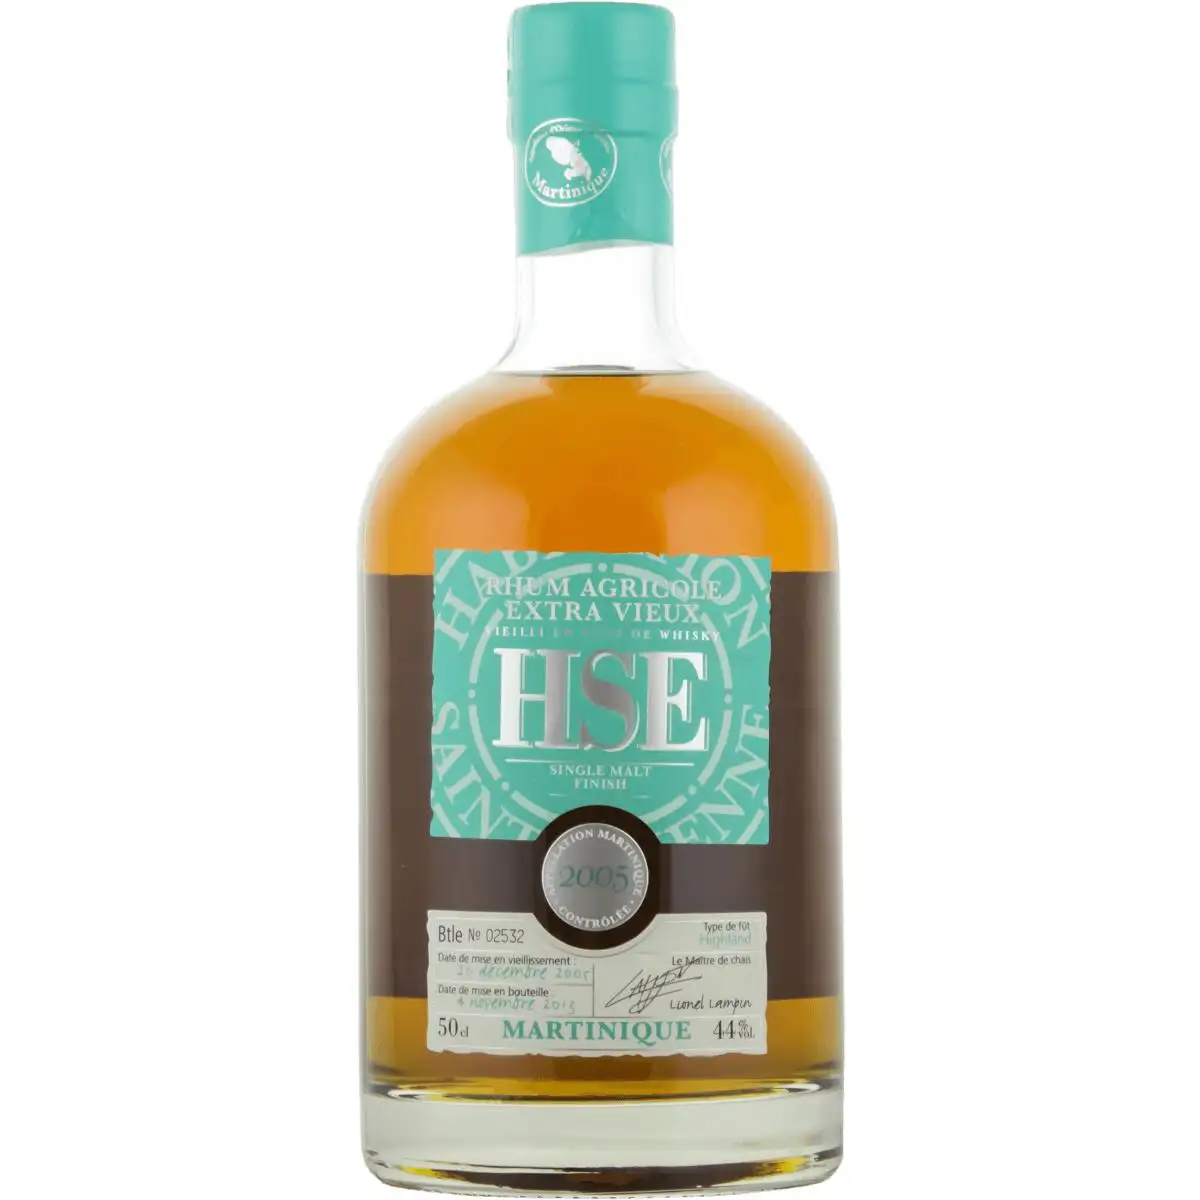 Image of the front of the bottle of the rum HSE Single Malt Highland Finish